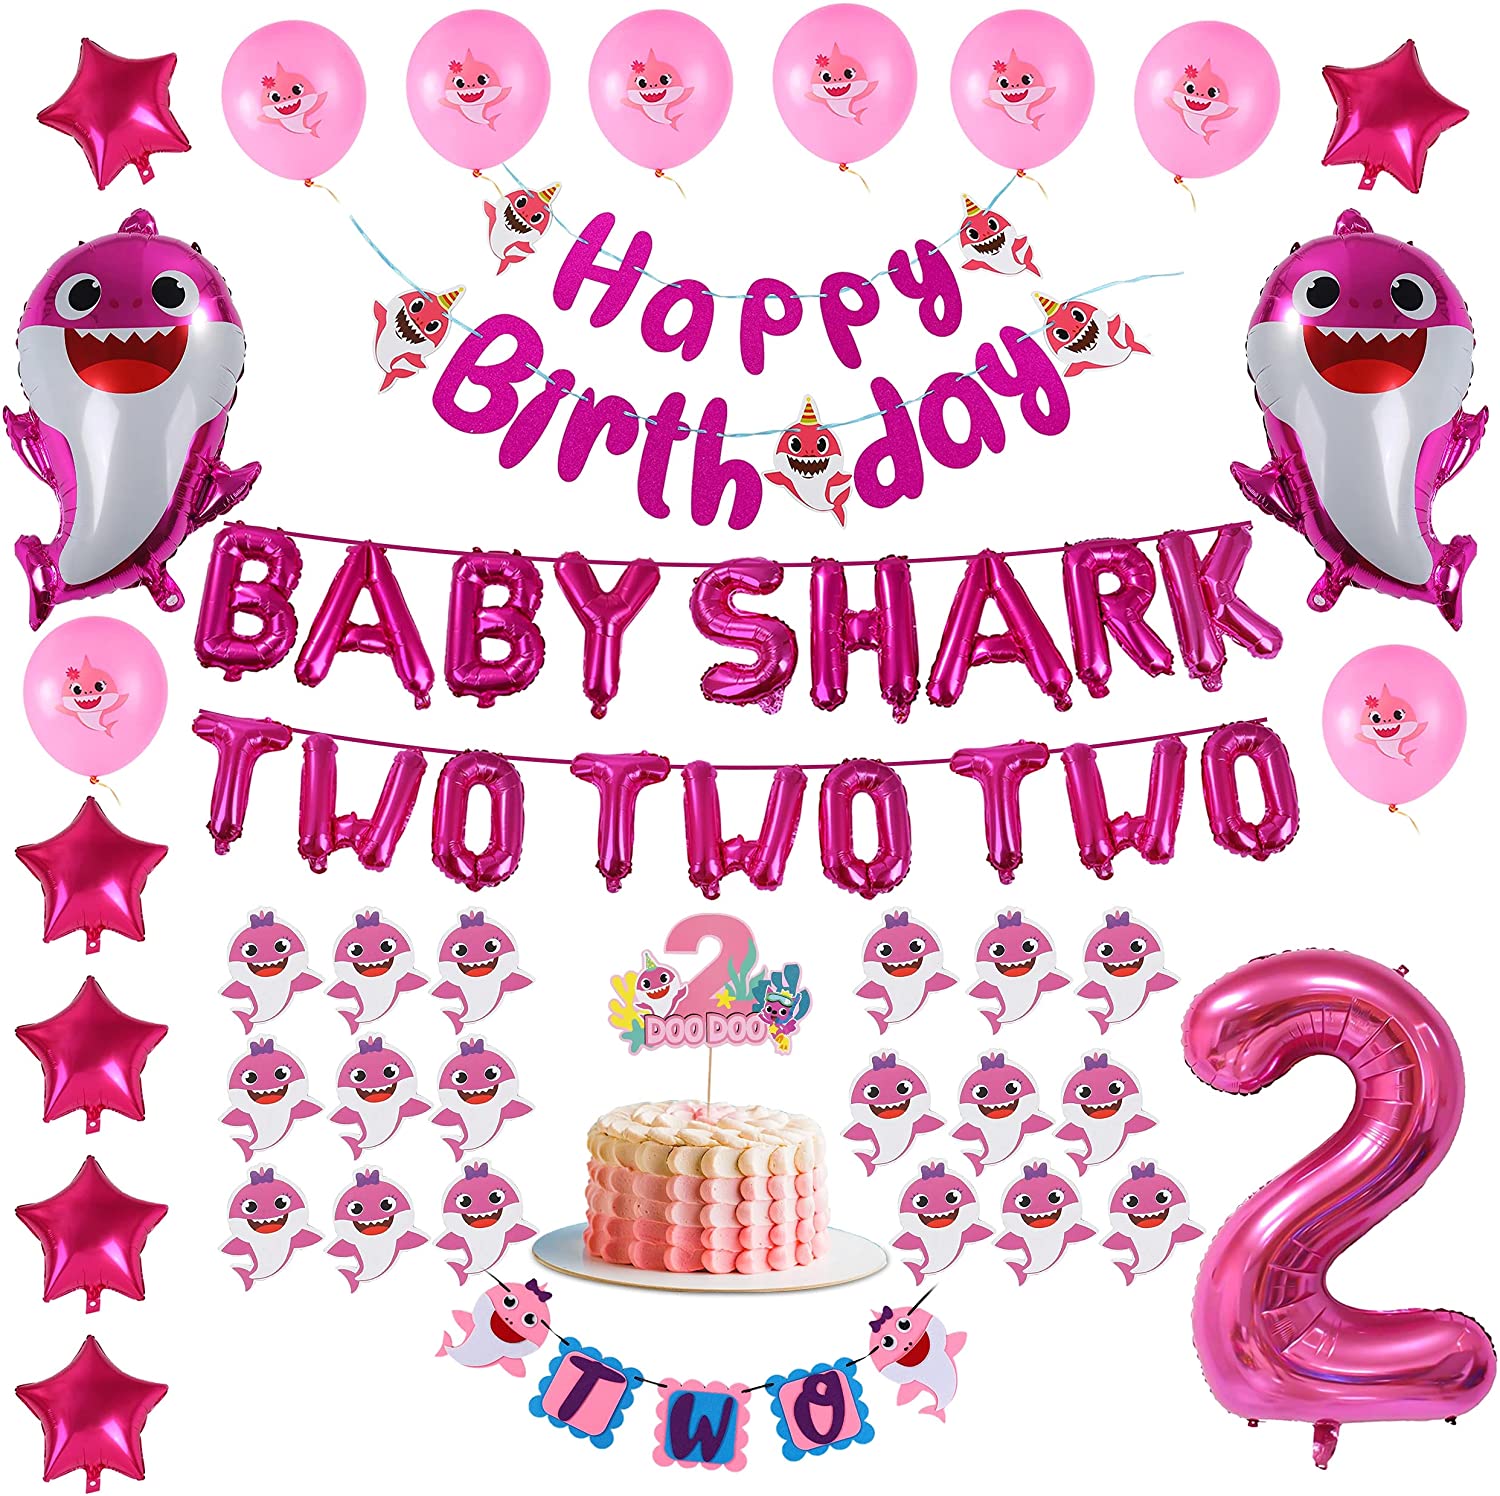 Pink Baby Shark 2nd Birthday Decorations For Girl Two Two Two And Number 2 Foil Balloons 2 Doo Doo Cake Topper Happy Birthday And Two Banner Cute Shark Latex Balloon Cupcake